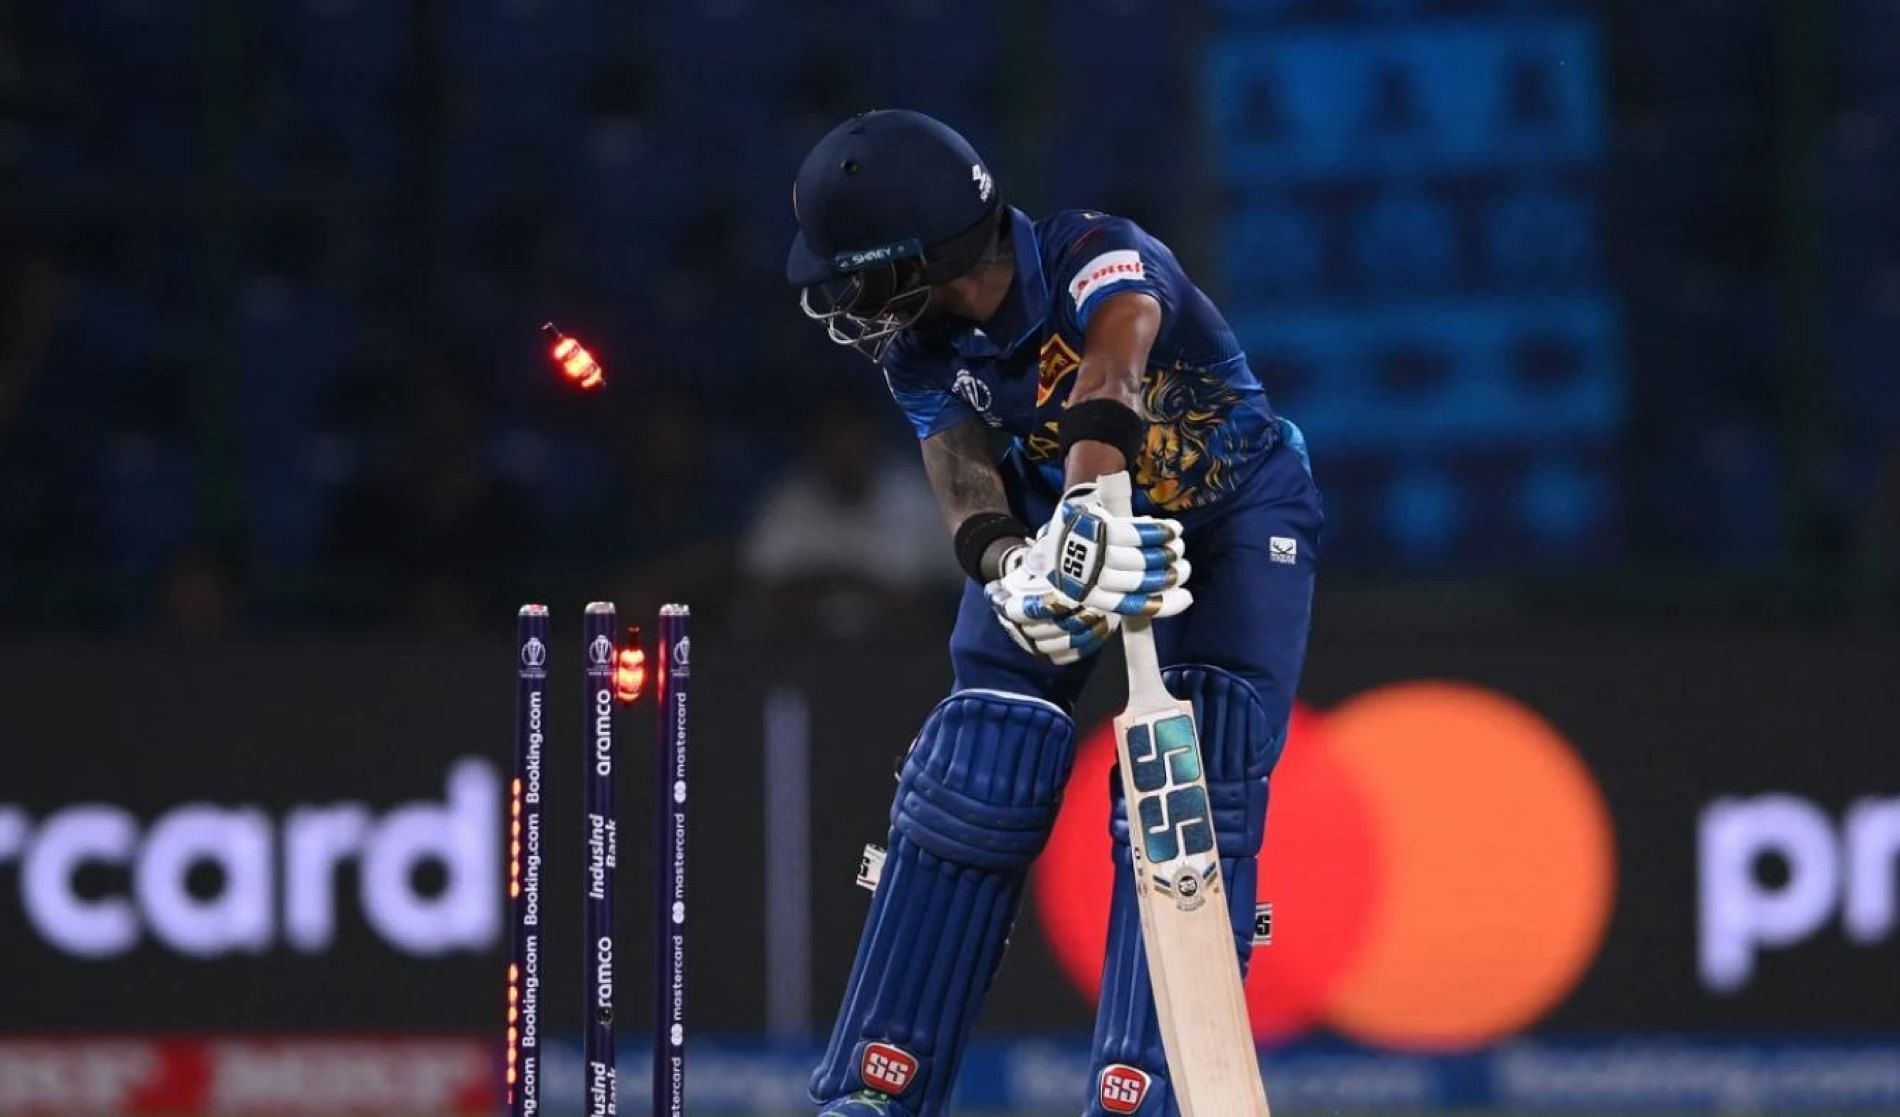 Nissanka had his stumps shattered on his World Cup debut.